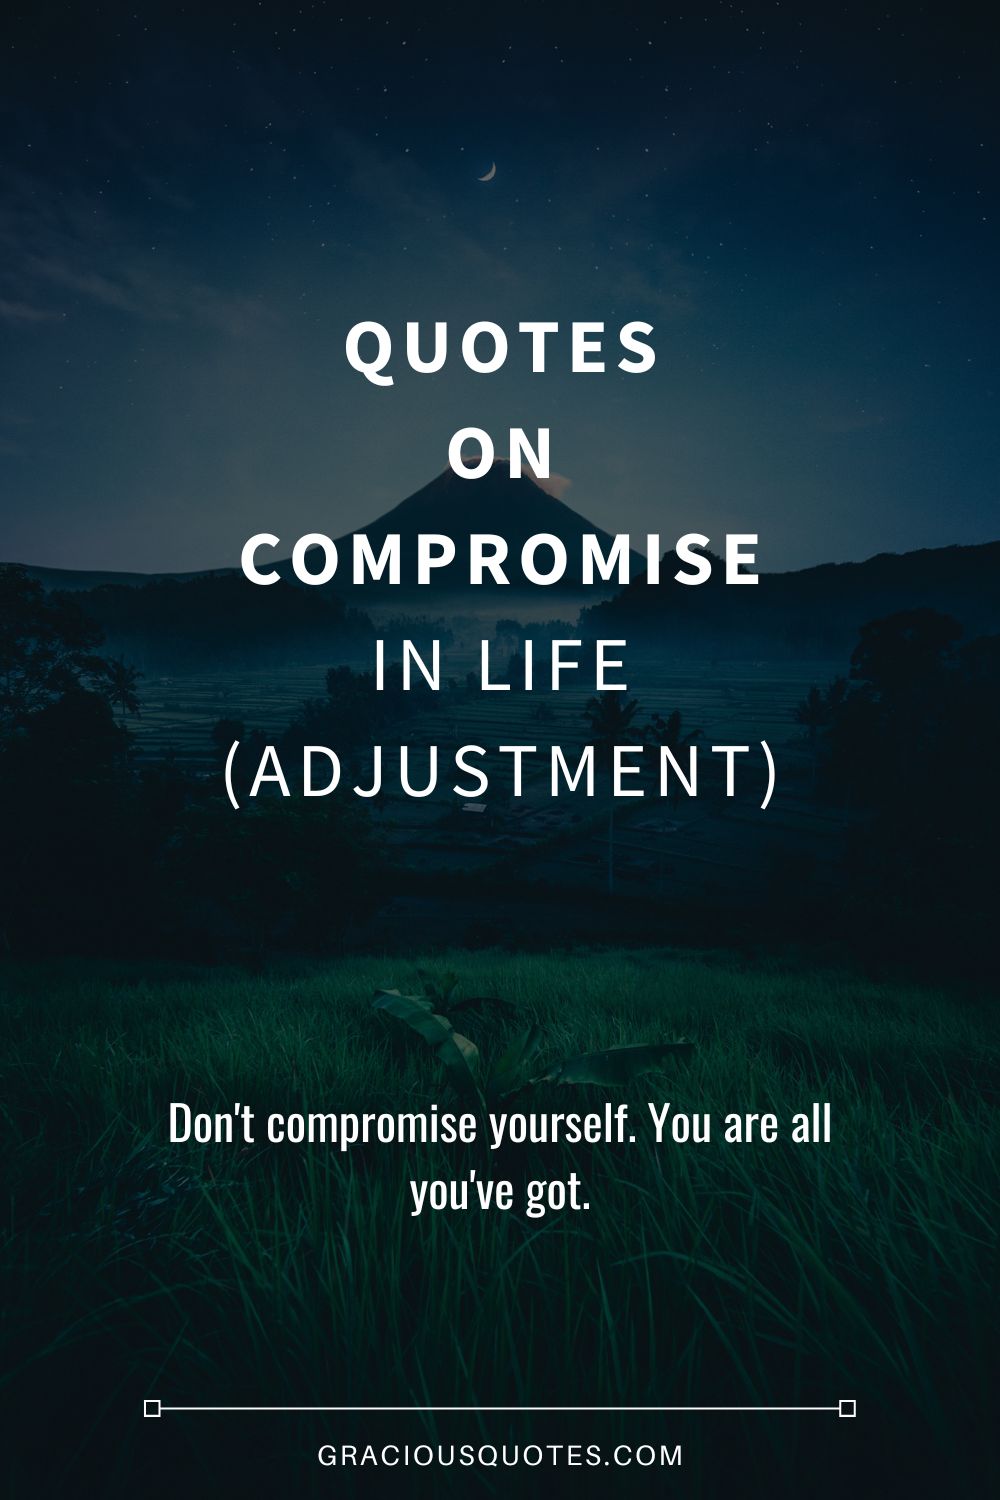 Quotes on Compromise in Life (ADJUSTMENT) - Gracious Quotes